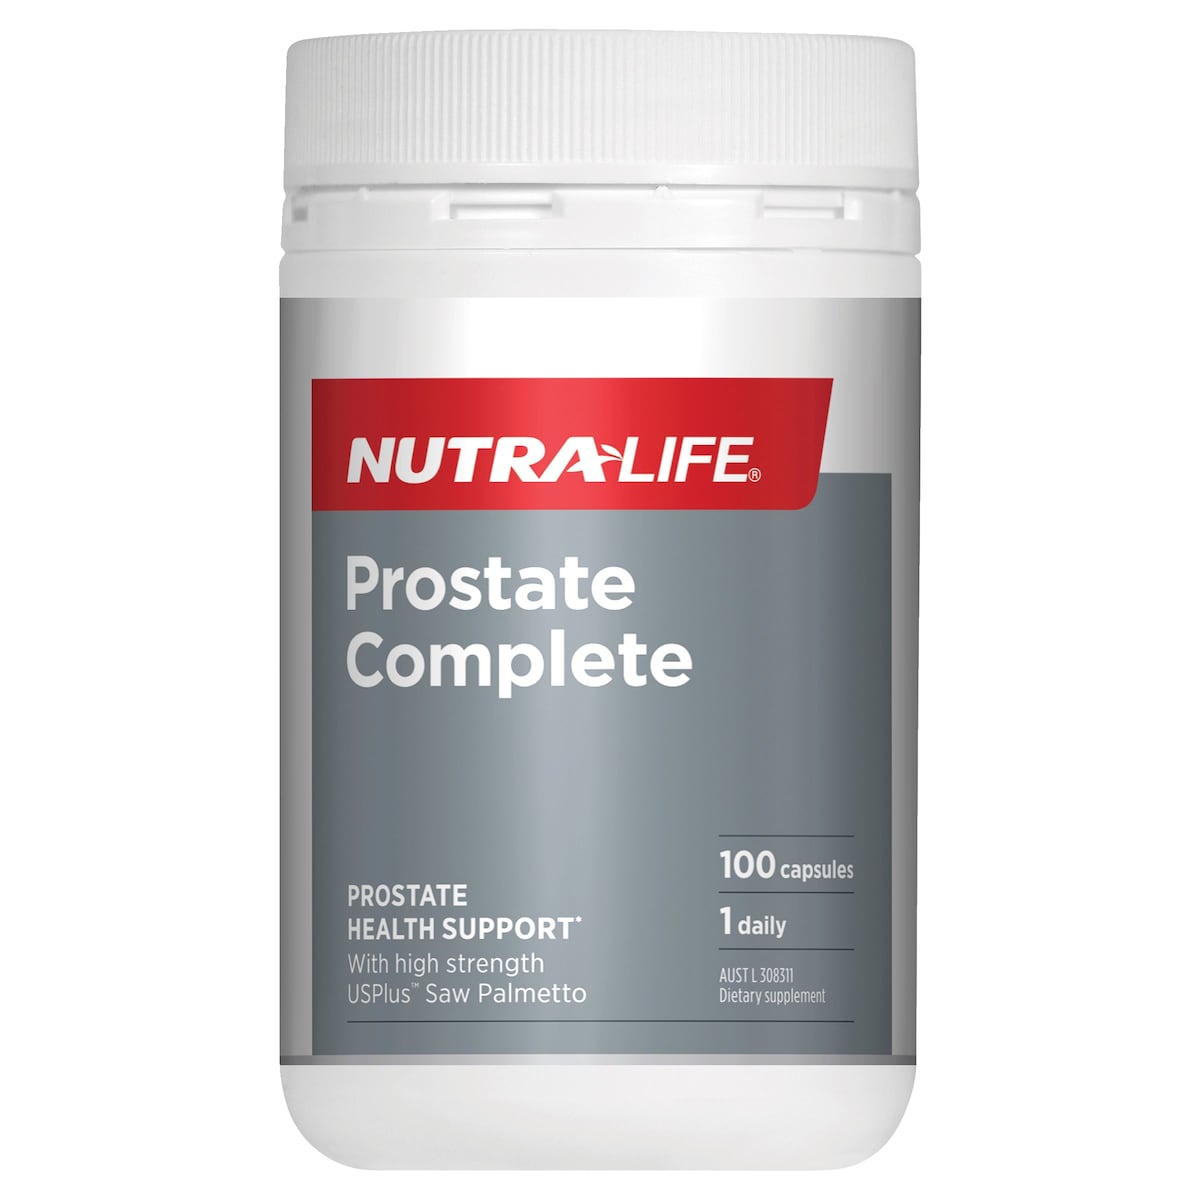 Nutra-Life Prostate Complete 100 Capsules